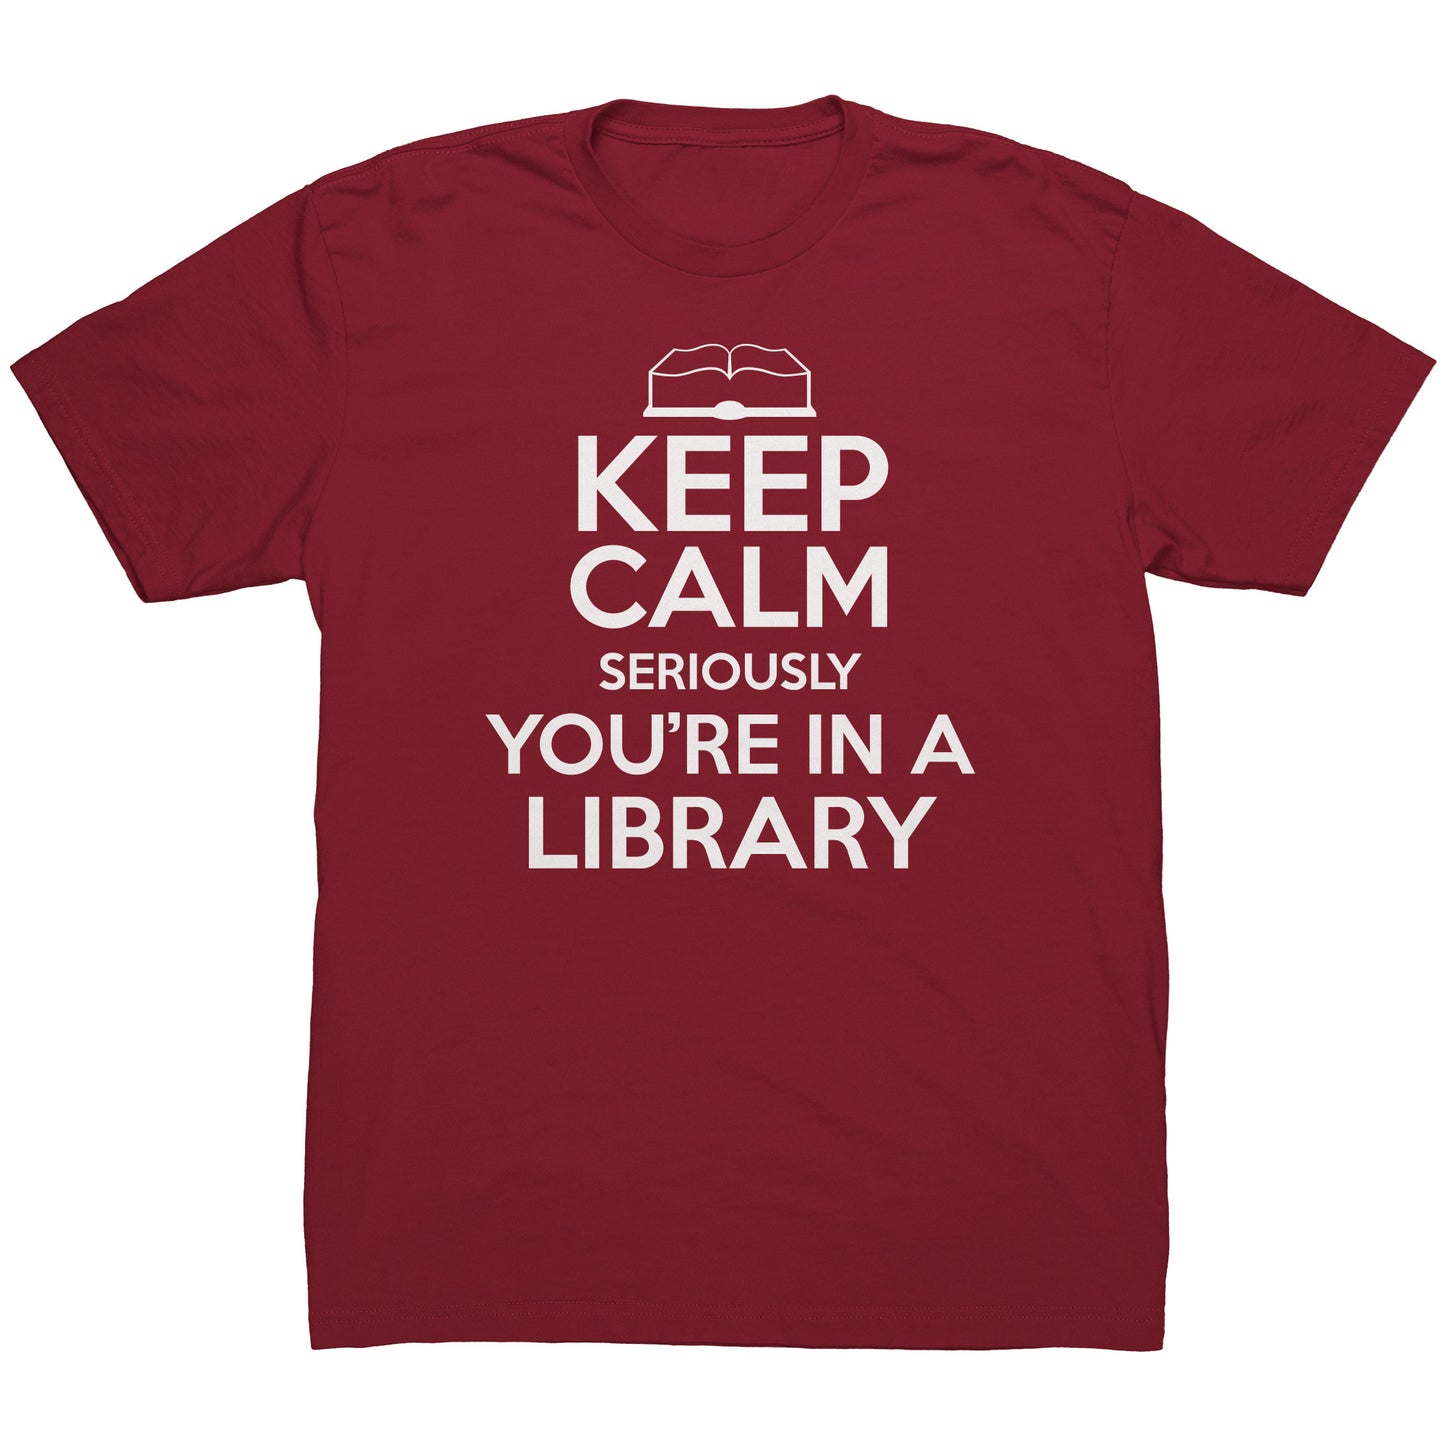 Keep Calm Seriously You're In A Library | Men's T-Shirt